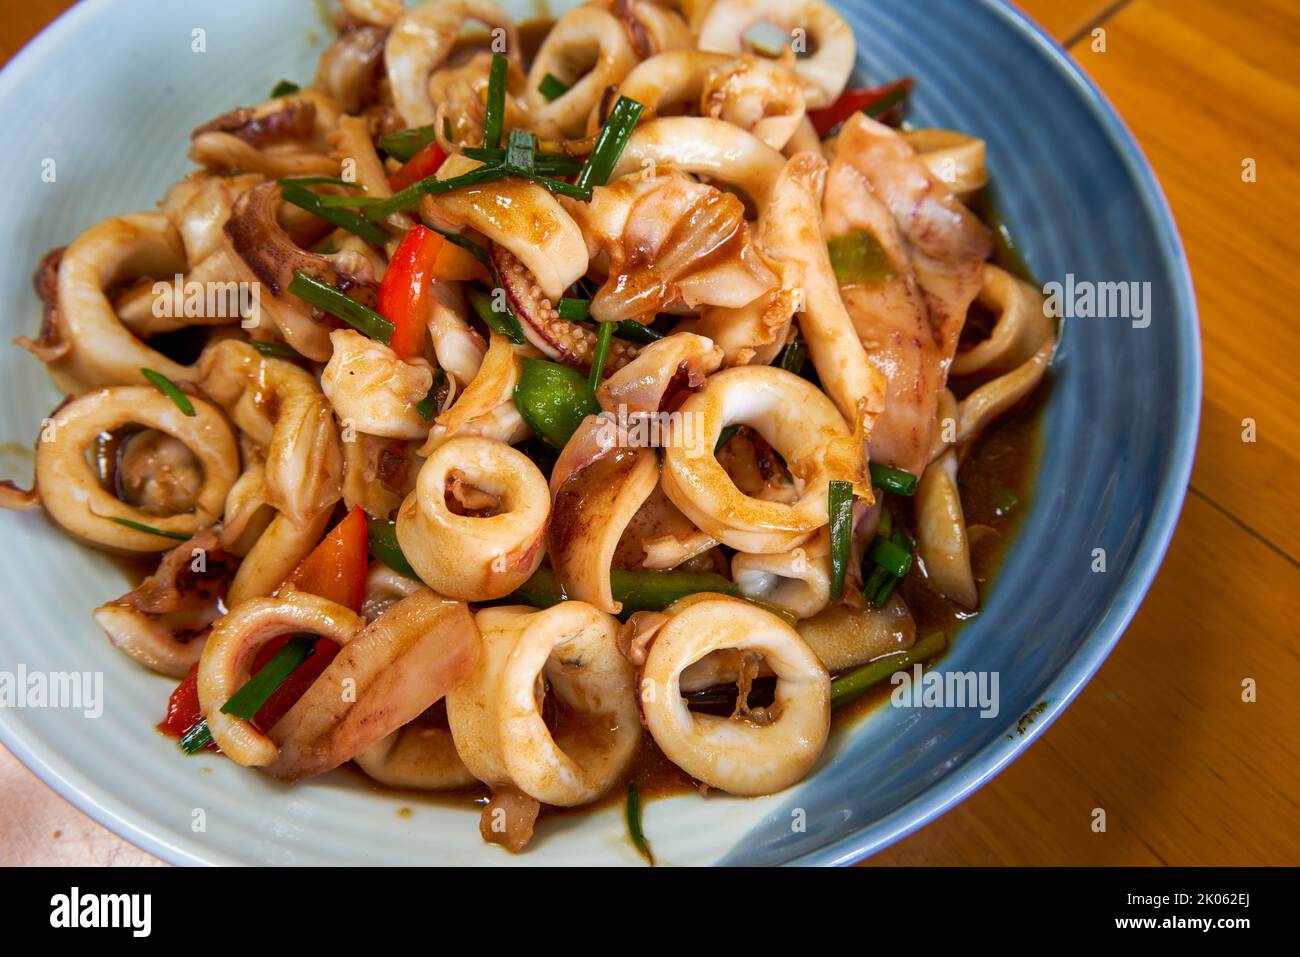 A plate of delicious and fragrant Chinese food with fried squid rings Stock Photo